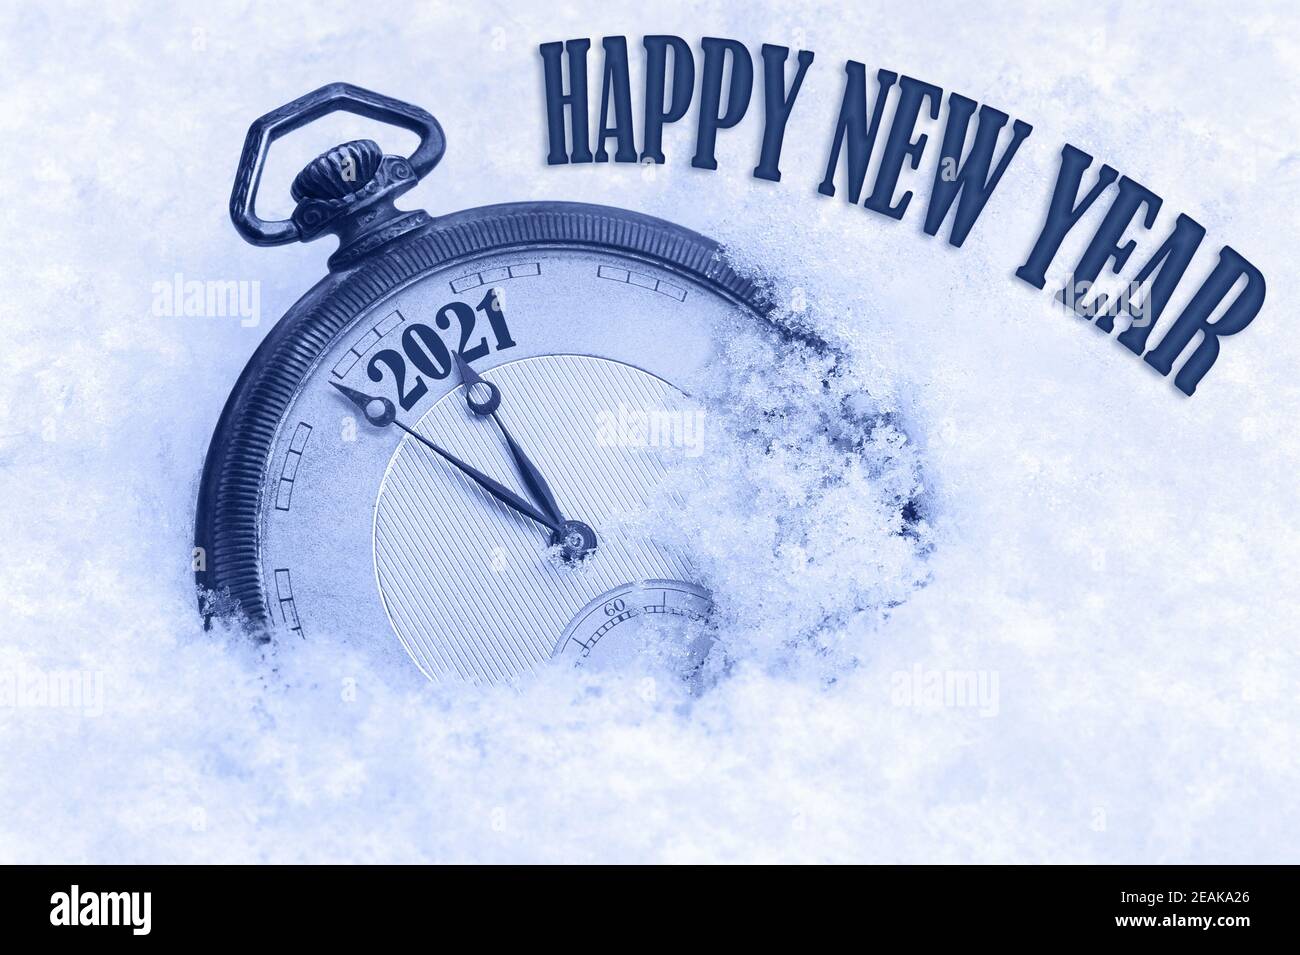 2021 Happy New Year, New Year 2021 greeting card, pocket watch in snow, English text, countdown to midnight Stock Photo